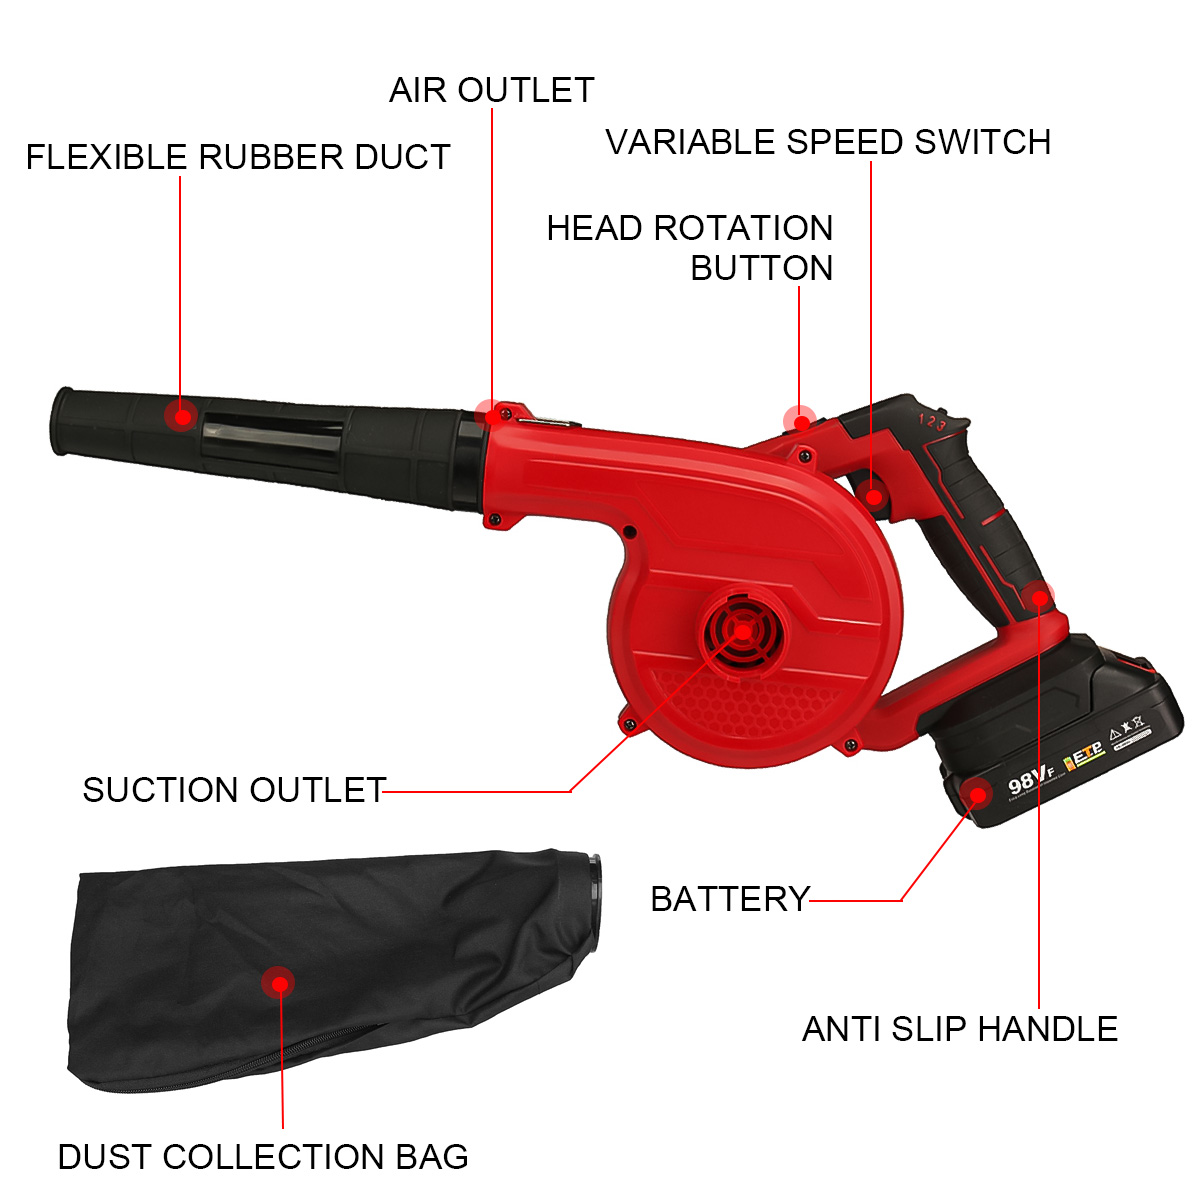 VIOLEWORKS-98VF-2-IN-1-Cordless-180deg-Rotation-Electric-Air-Blower--Suction-Handheld-Leaf-Computer--1920391-7